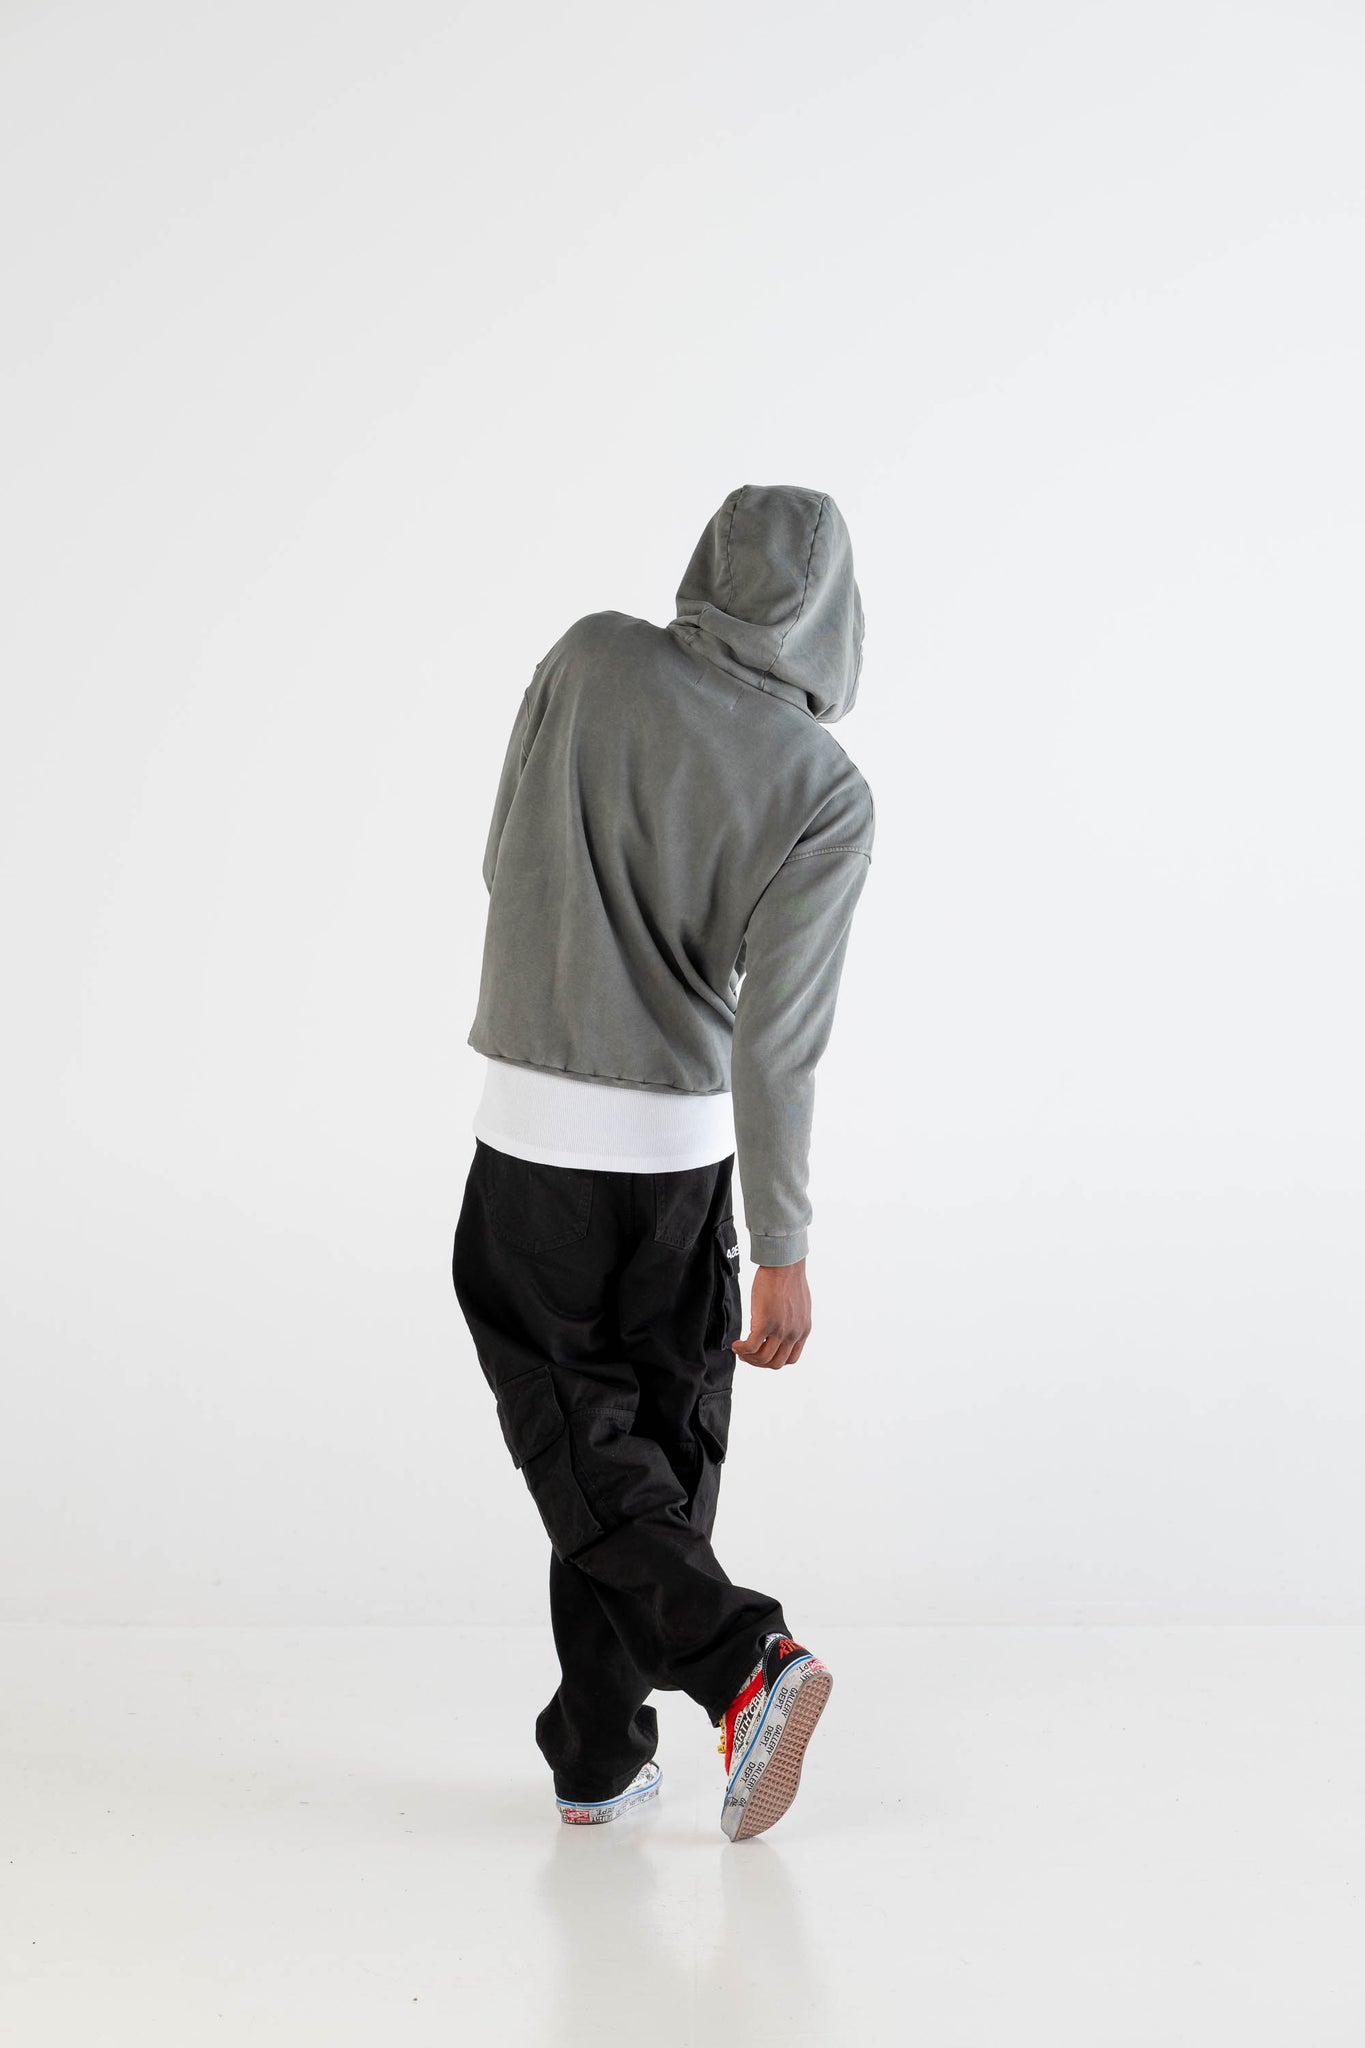 Hoodie Boxy “DYSTOPIA” 012 Stone Washed